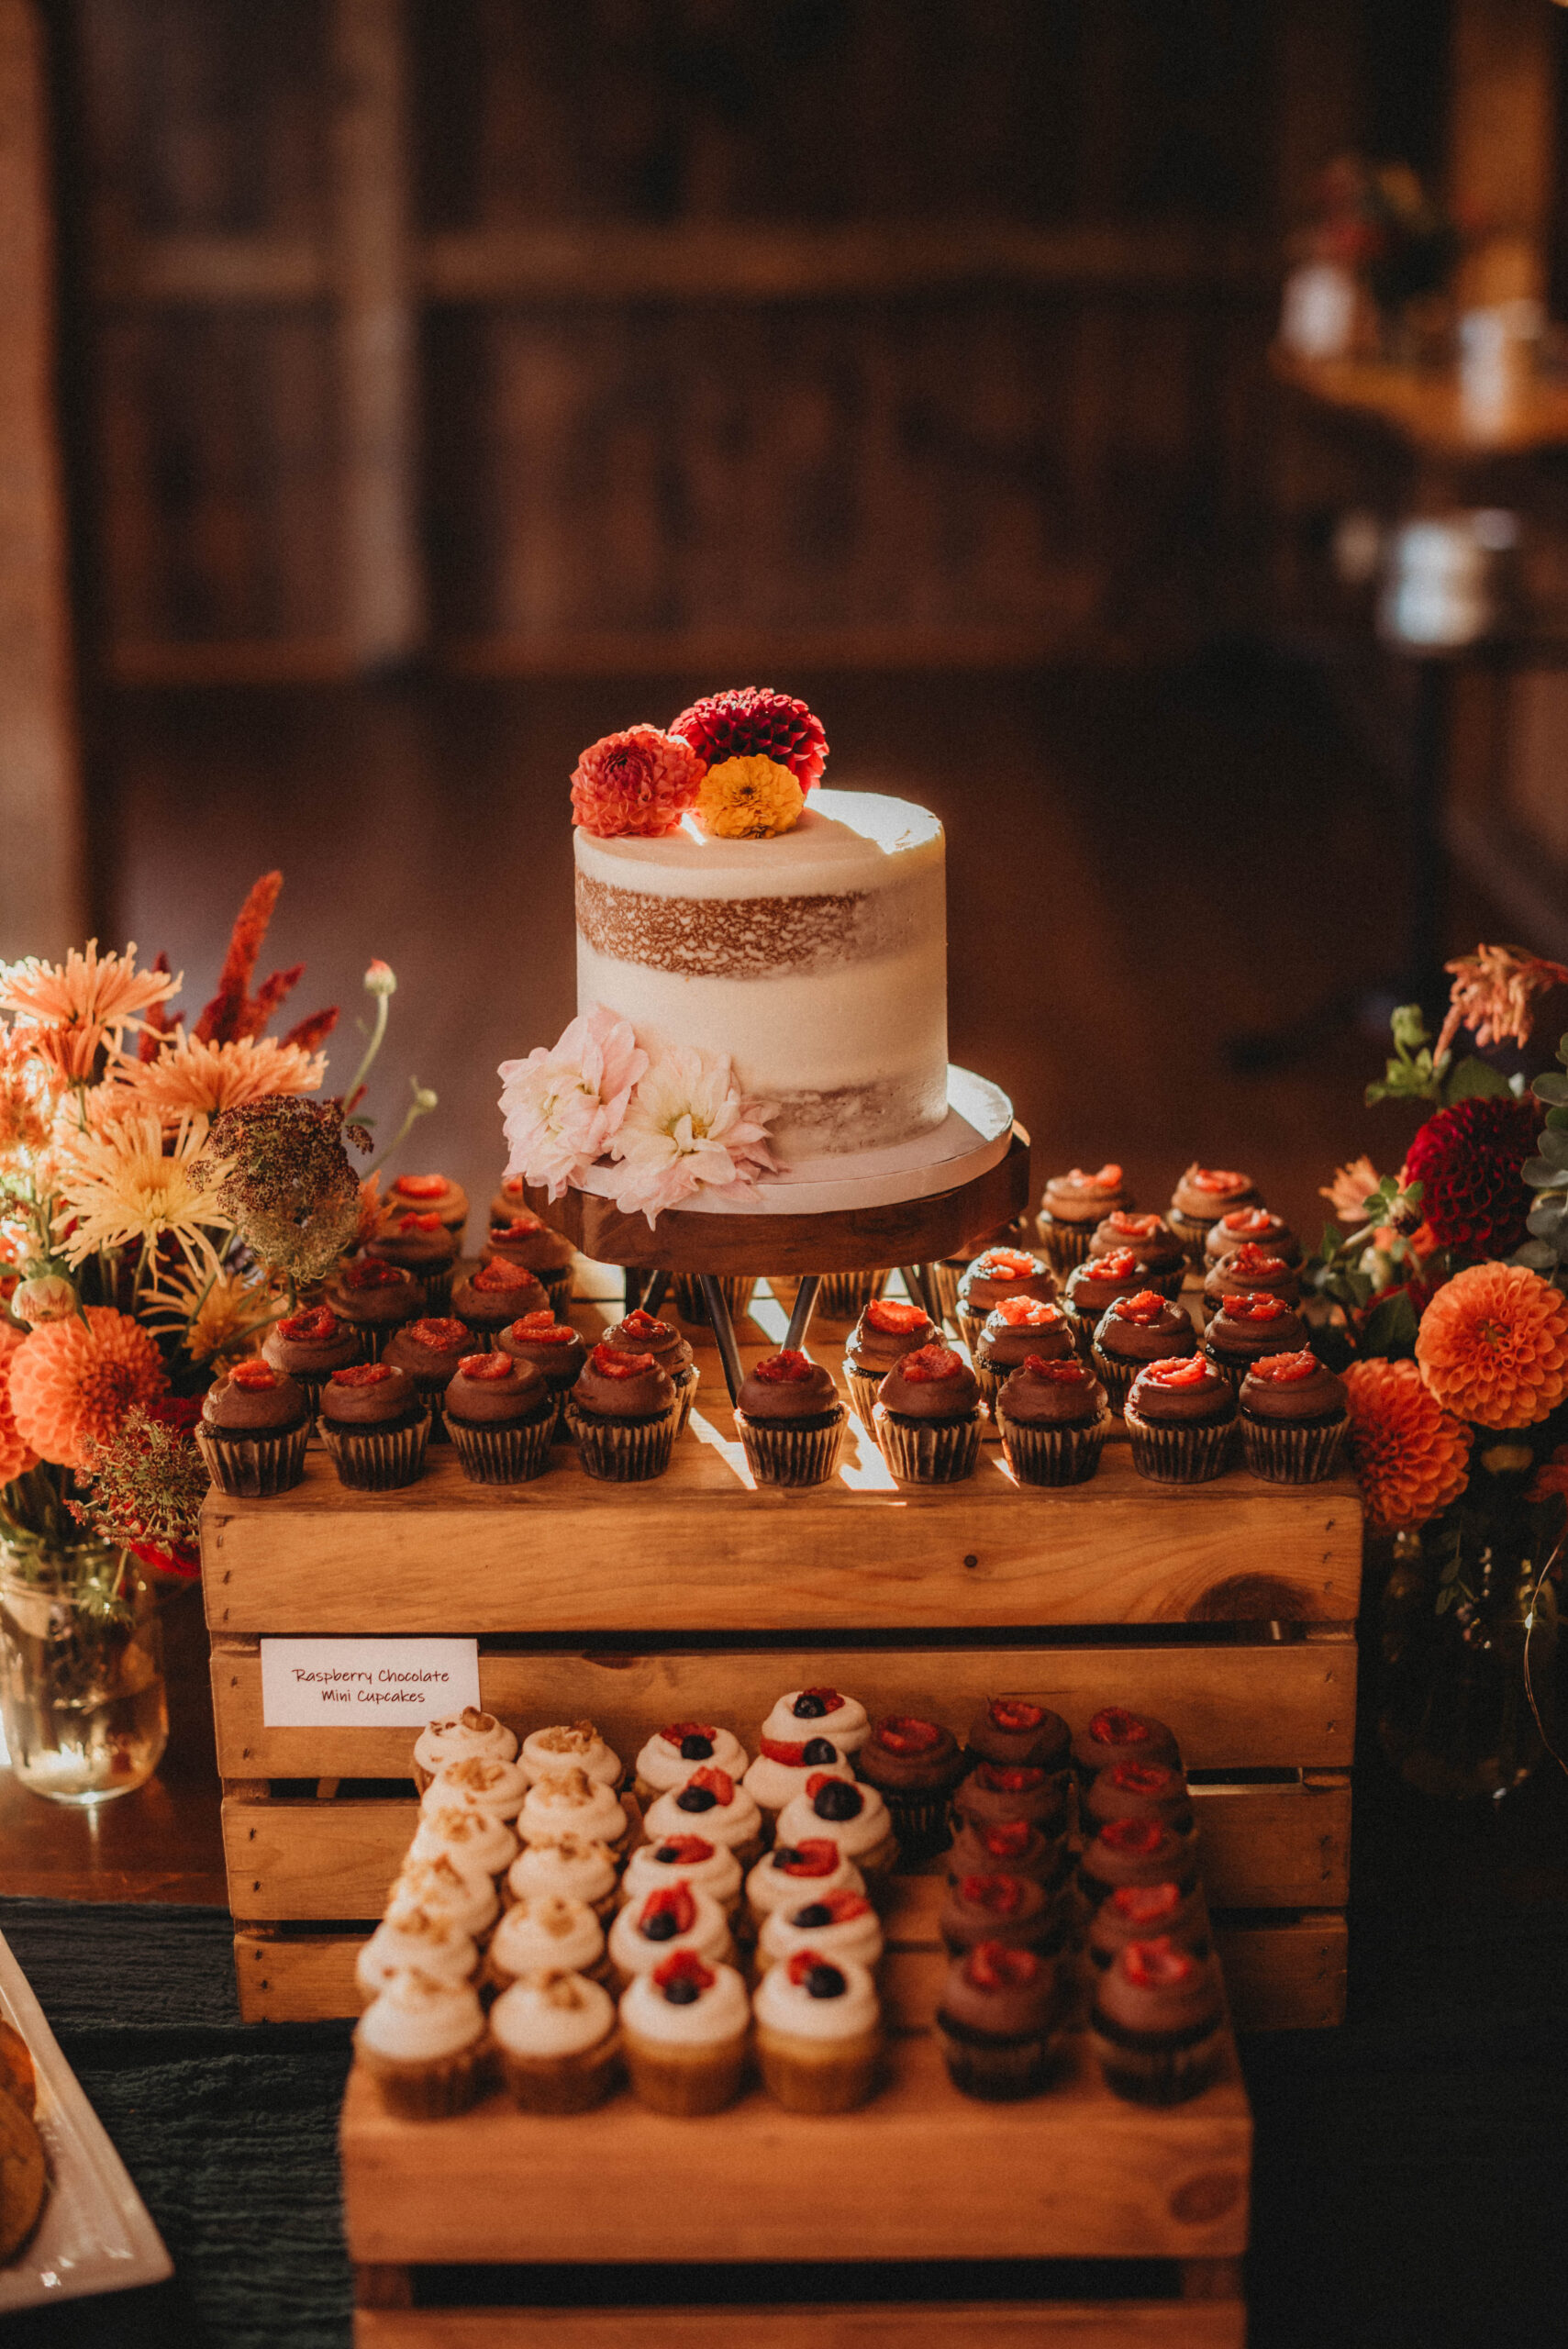 A small, rustic wedding cake sitting as the focal point of a dessert spread of cupcakes, cookies, and fall flowers